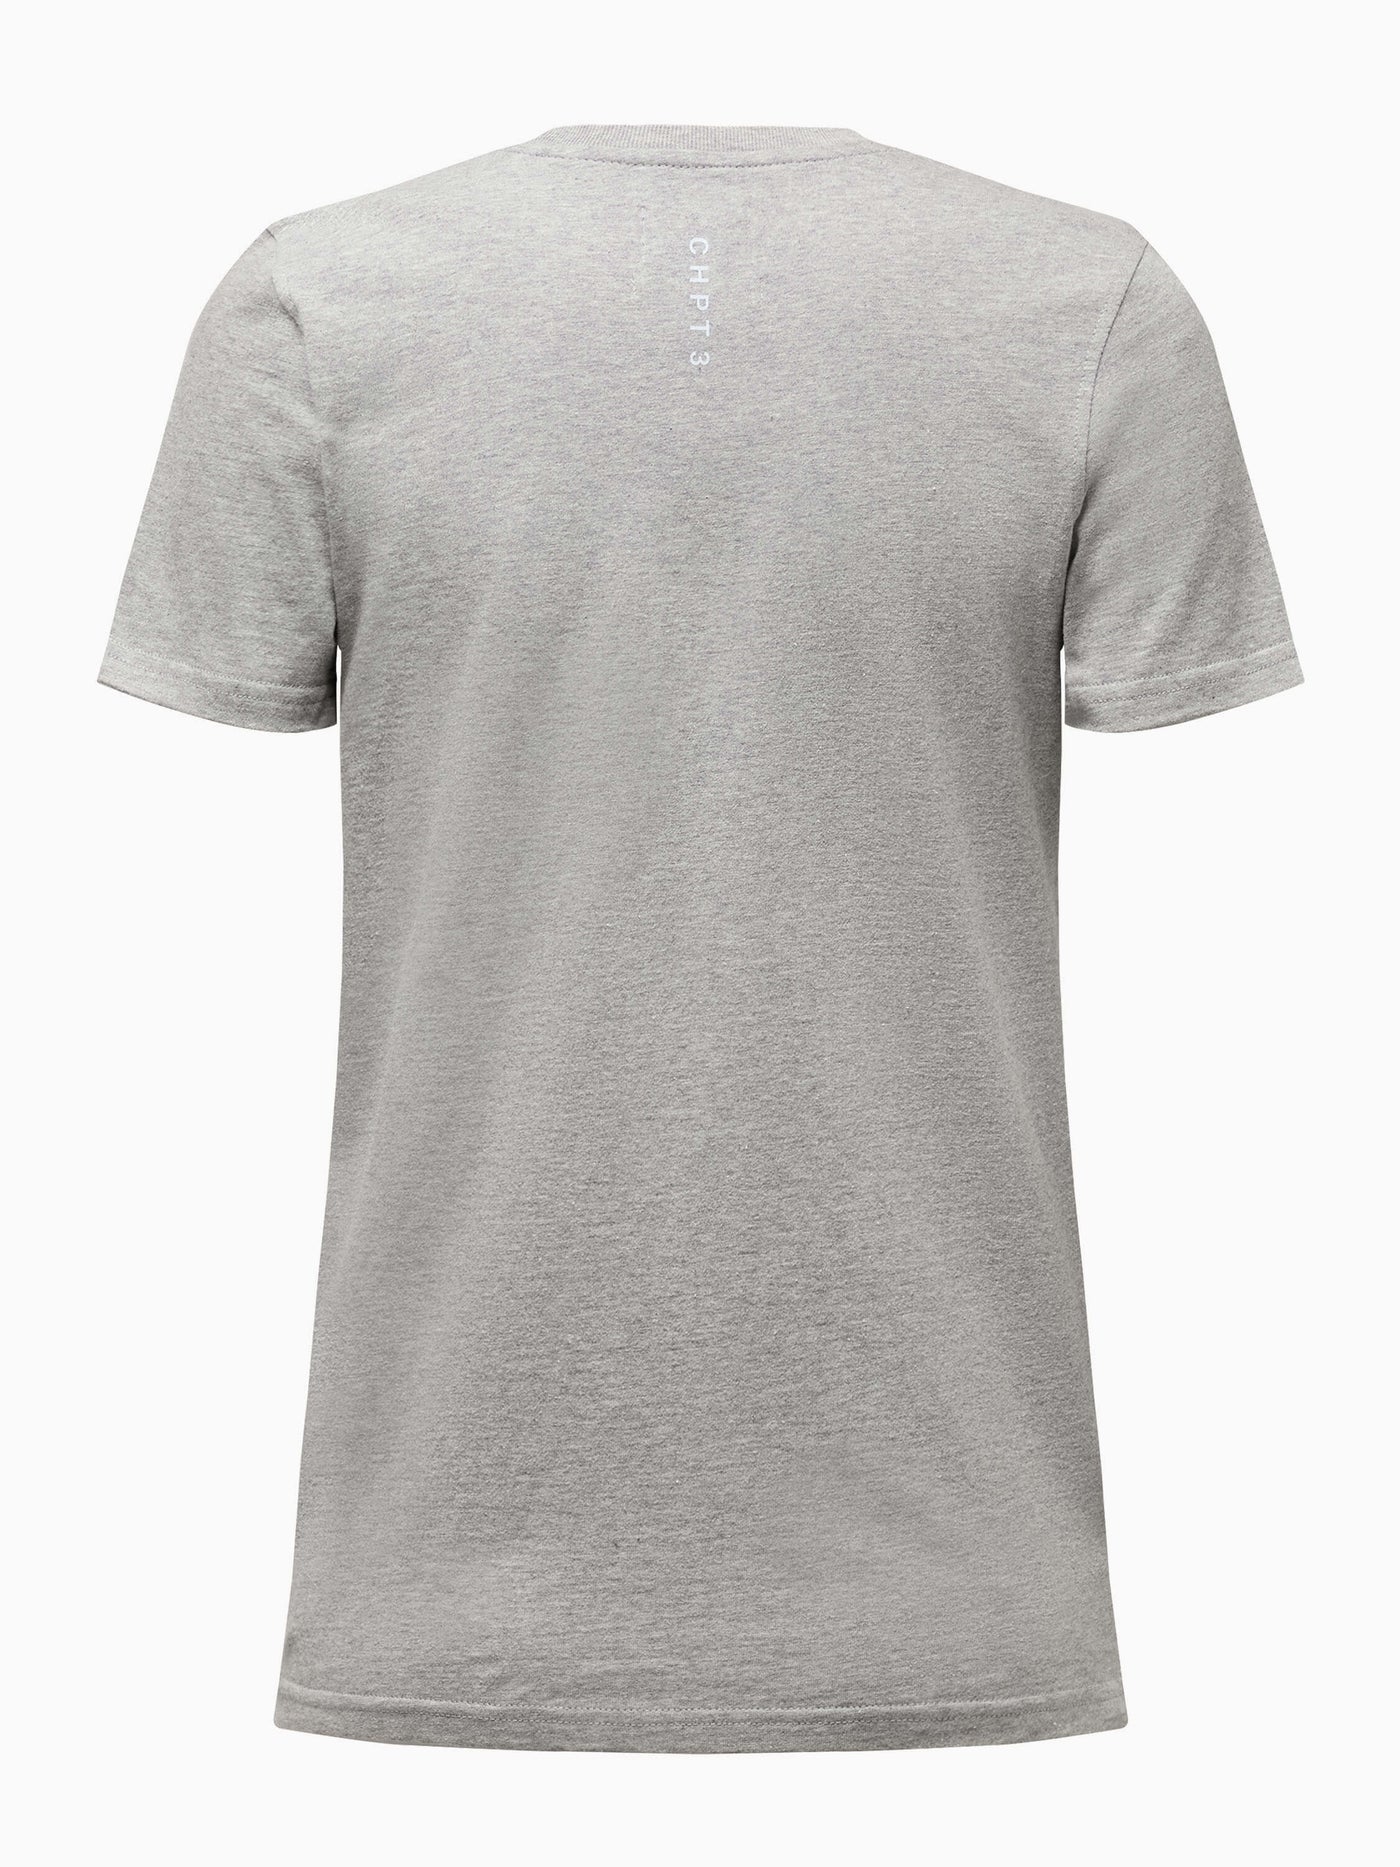 CHPT3 Elysée women's organic cotton t-shirt in colour grey marl, pictured from behind #color_grey-marl